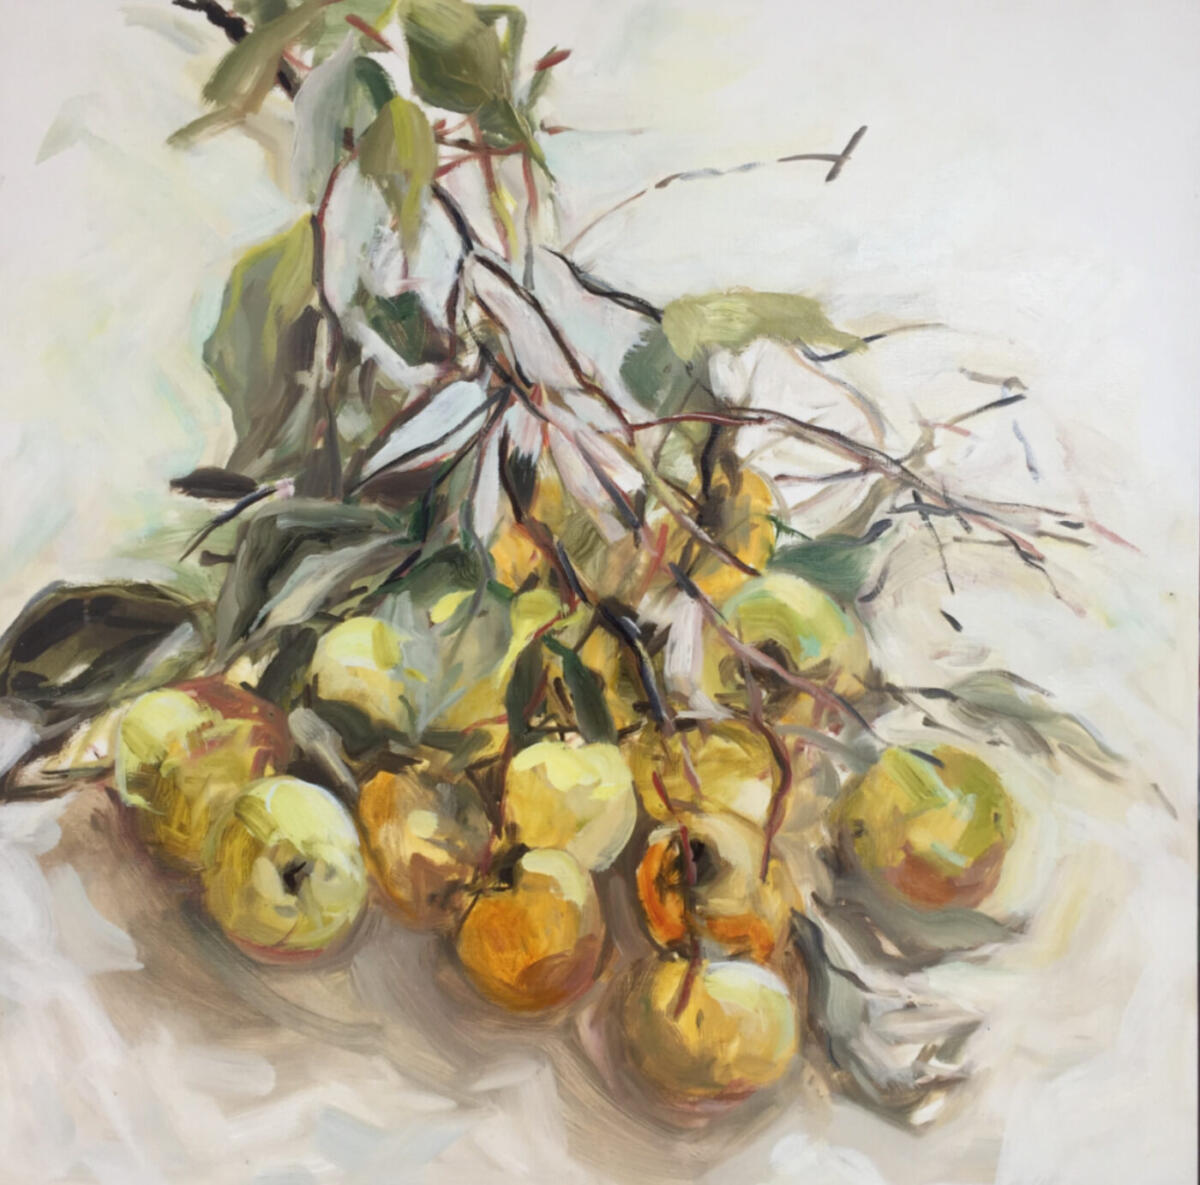 Evrard Jamie Windfall Persimmons Monday Oil on Panel 24x24 $3500